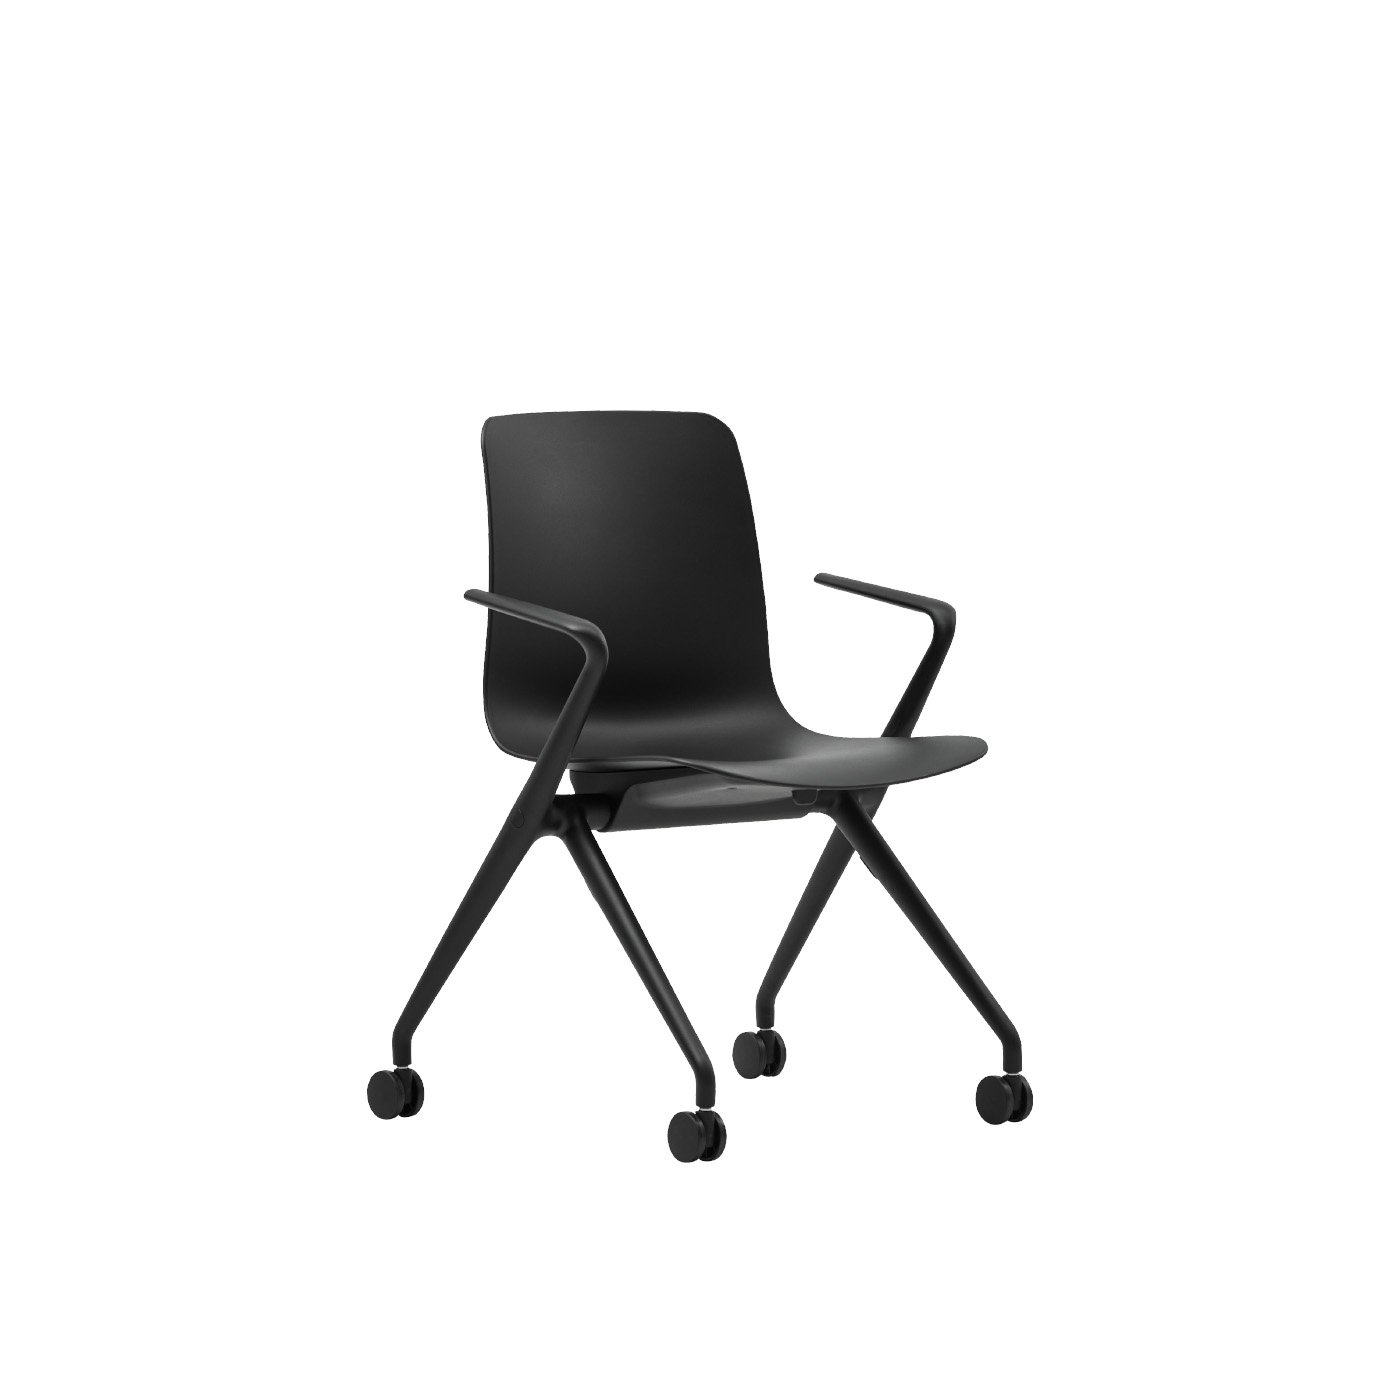 Haworth Bowi conference chair black at an angle